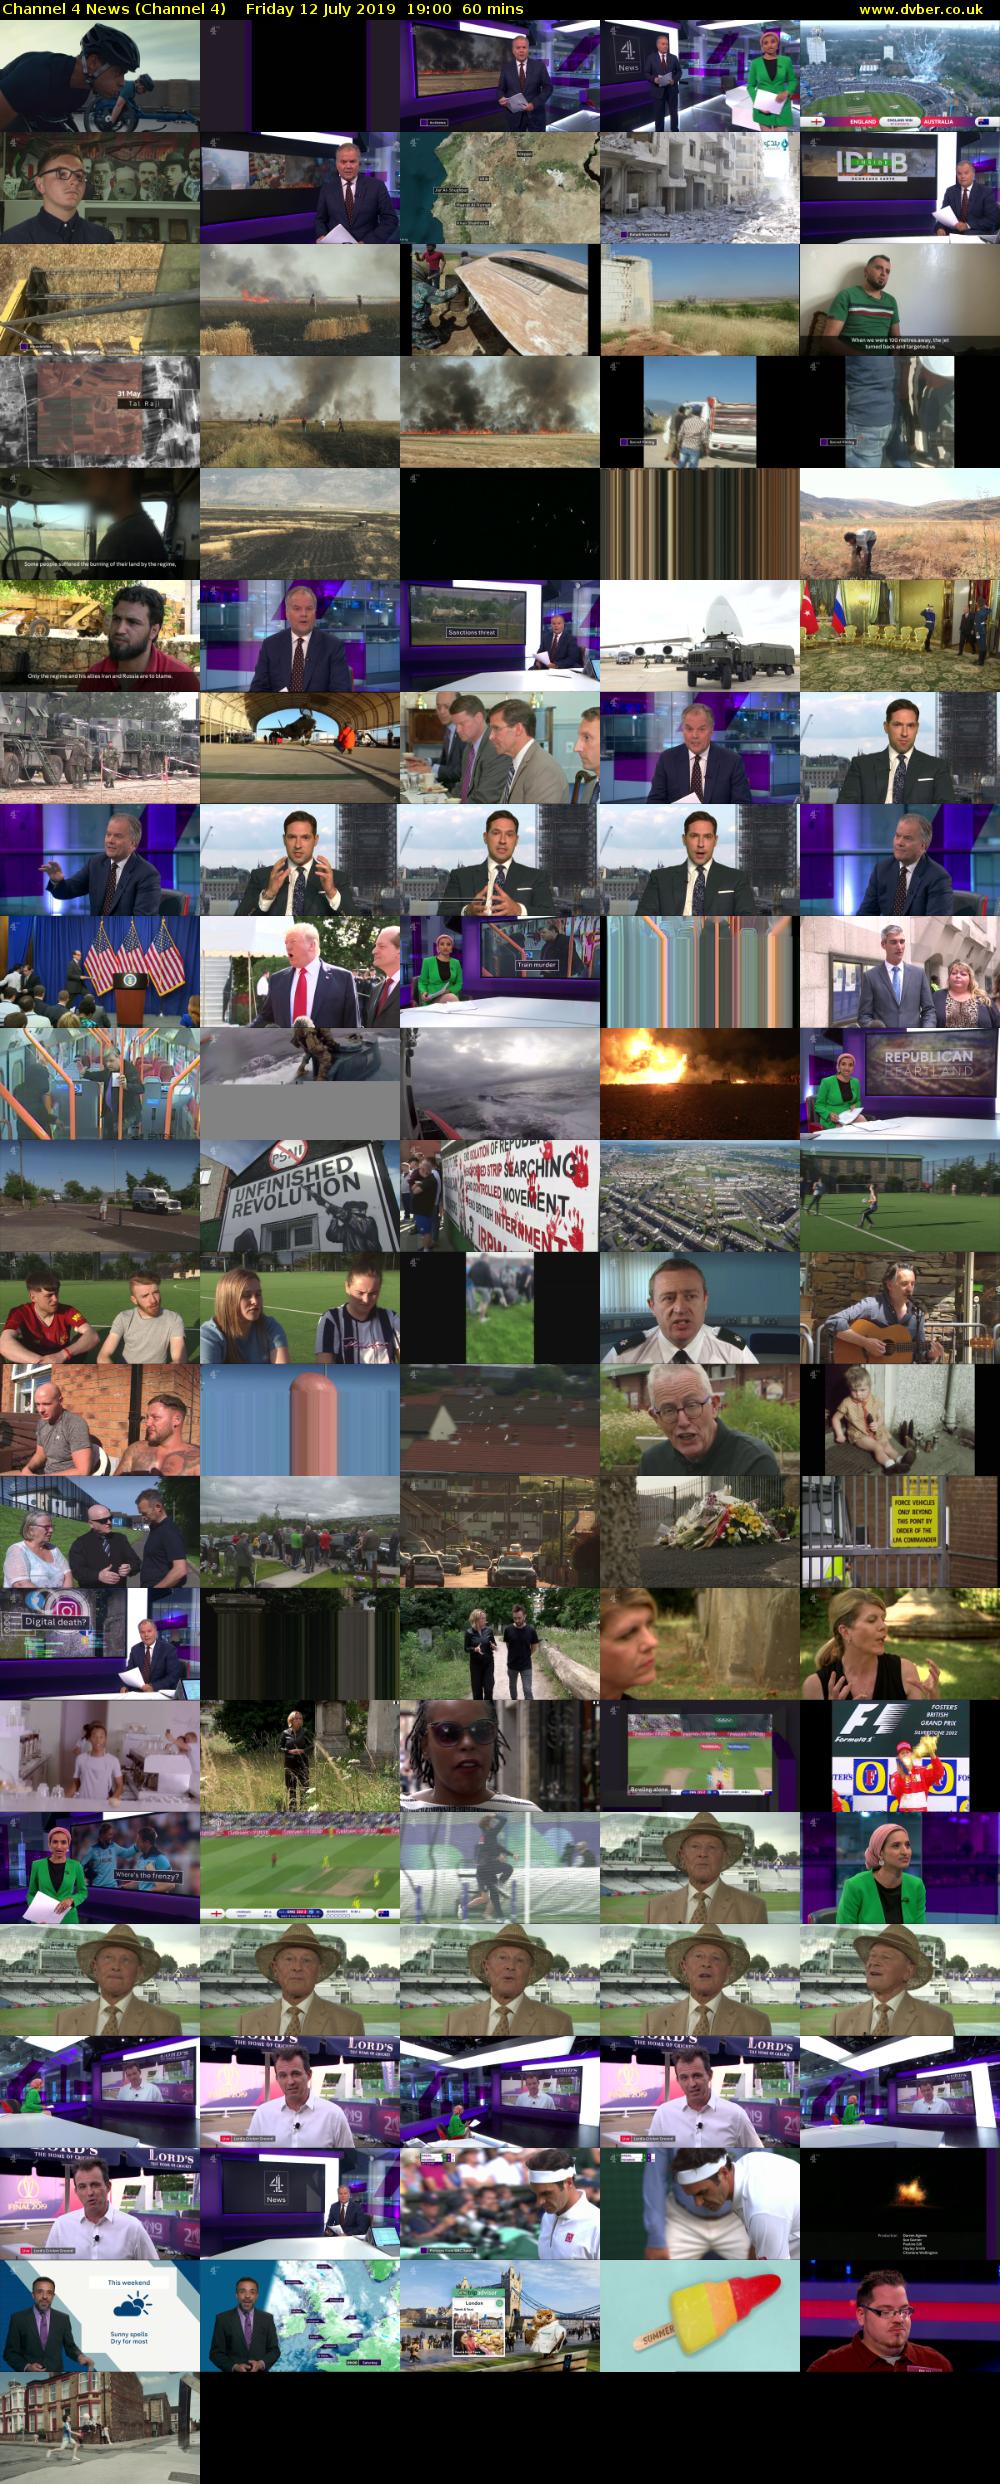 Channel 4 News (Channel 4) Friday 12 July 2019 19:00 - 20:00